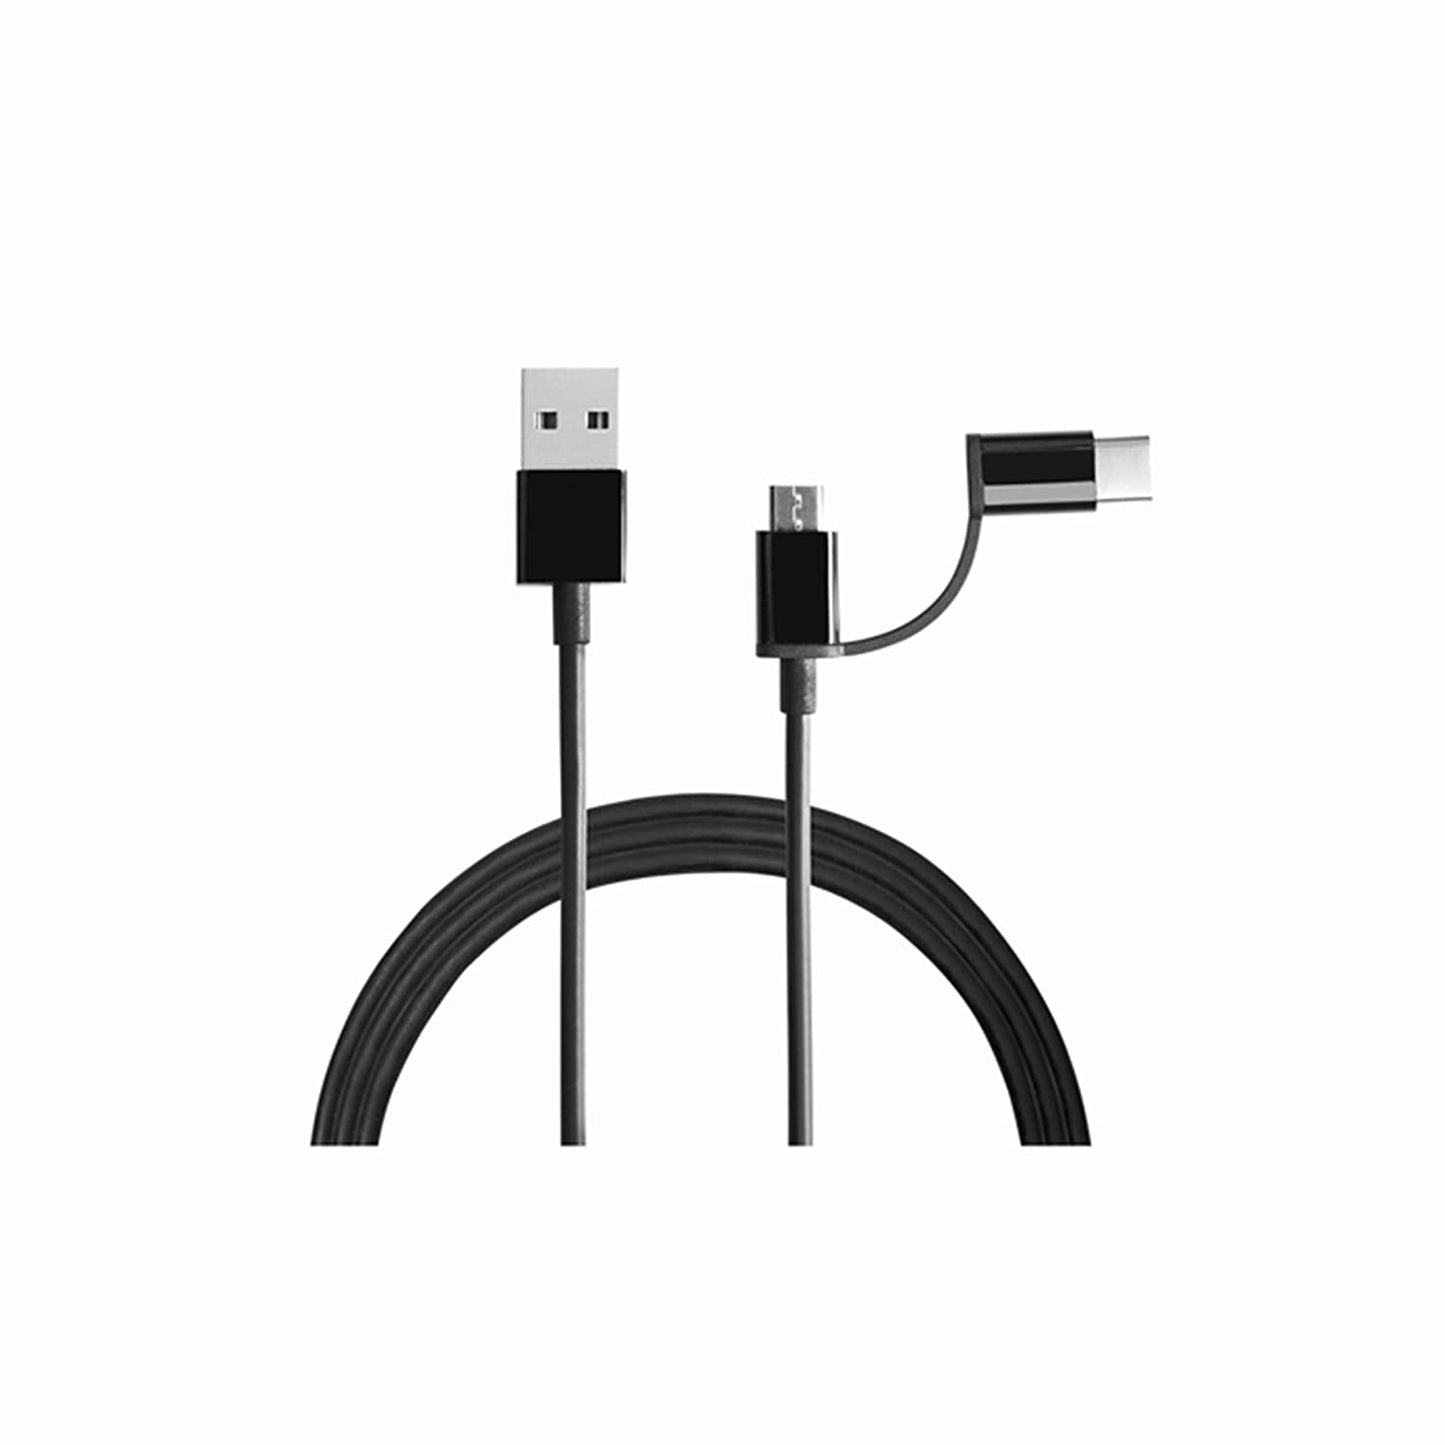 Mi 2-in-1 USB Cable (Micro USB to Type-C,100Cm) | USB Cable For Smartphone and Charging Adapter, Black